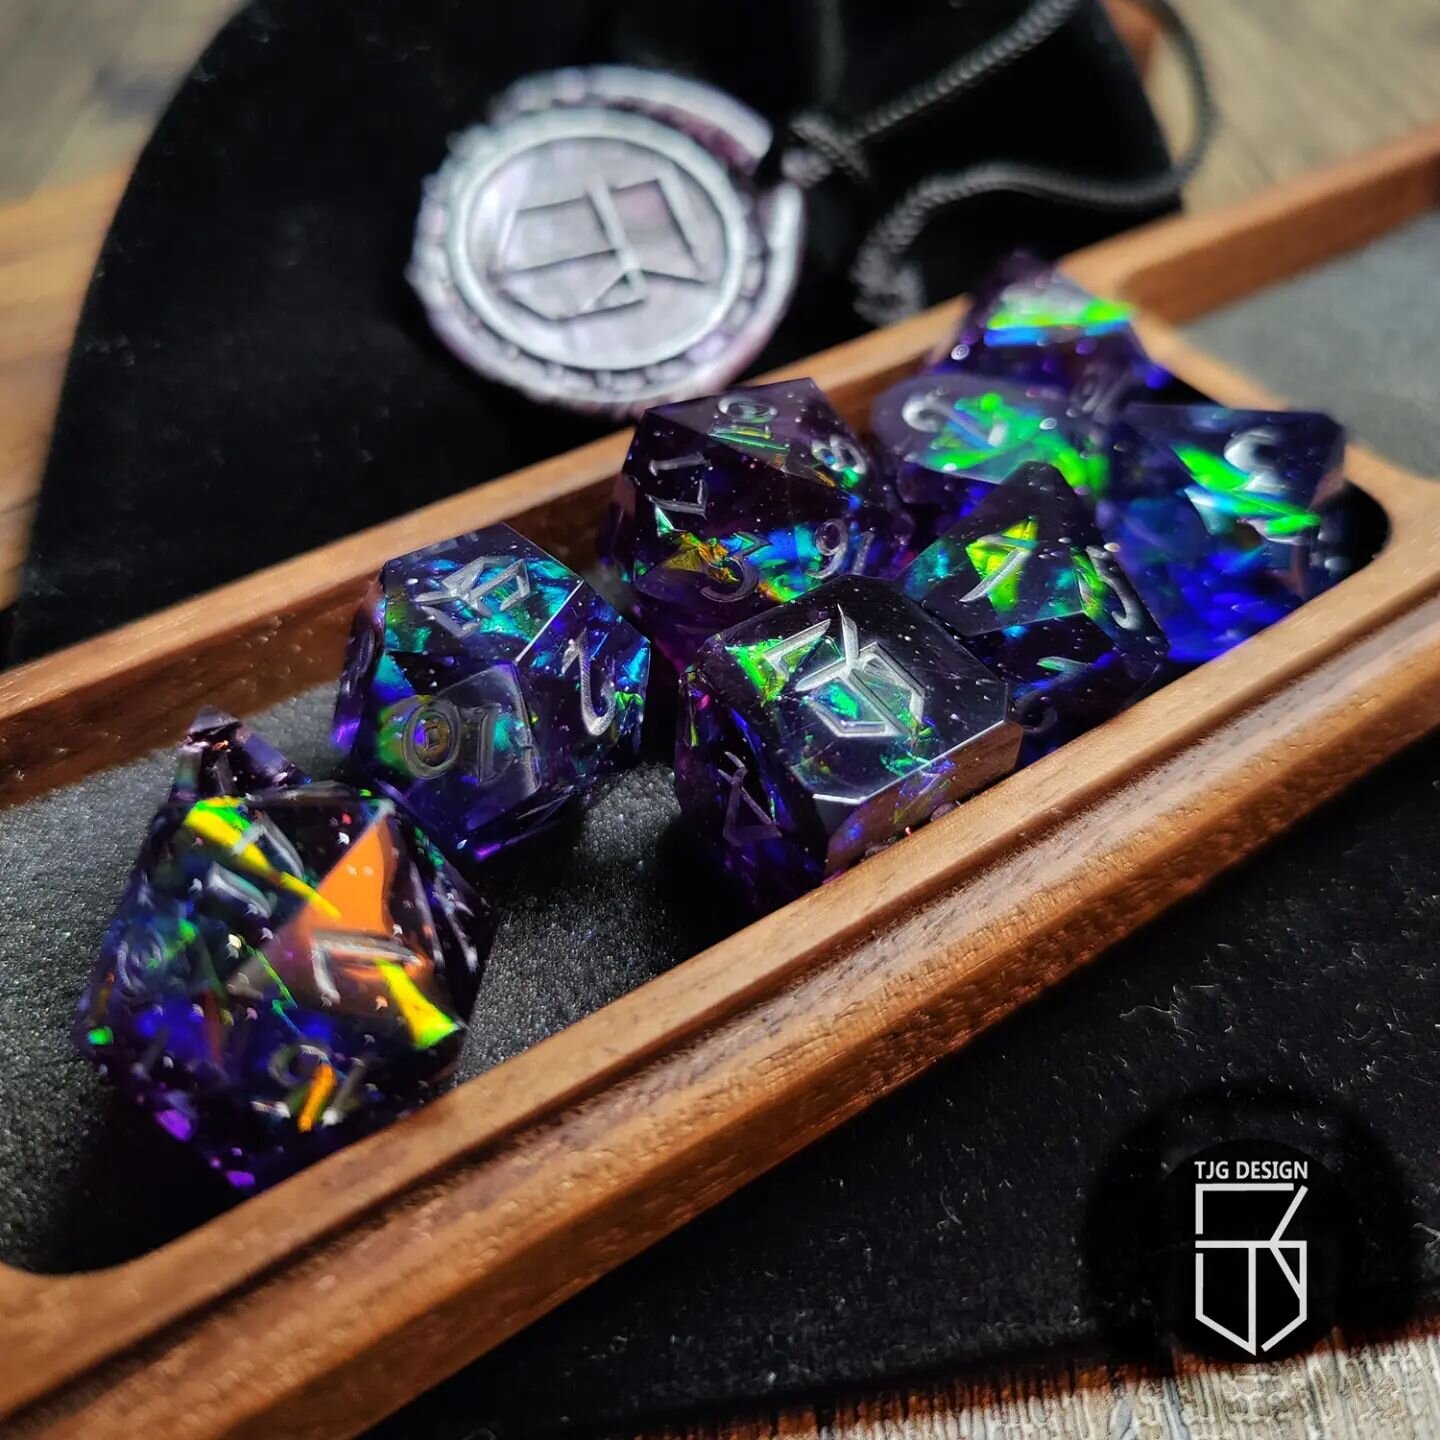 Hey folks!  I wanted to share some detailed photos of my Aurora Borealis Dice along with my Mango Wood Dice Case.  Really pleased with how these have turned out!

#workshop #dnd #tabletopRPGs #dice #dicemaking #rpgdice #dnddice #dicedesign #resin #re